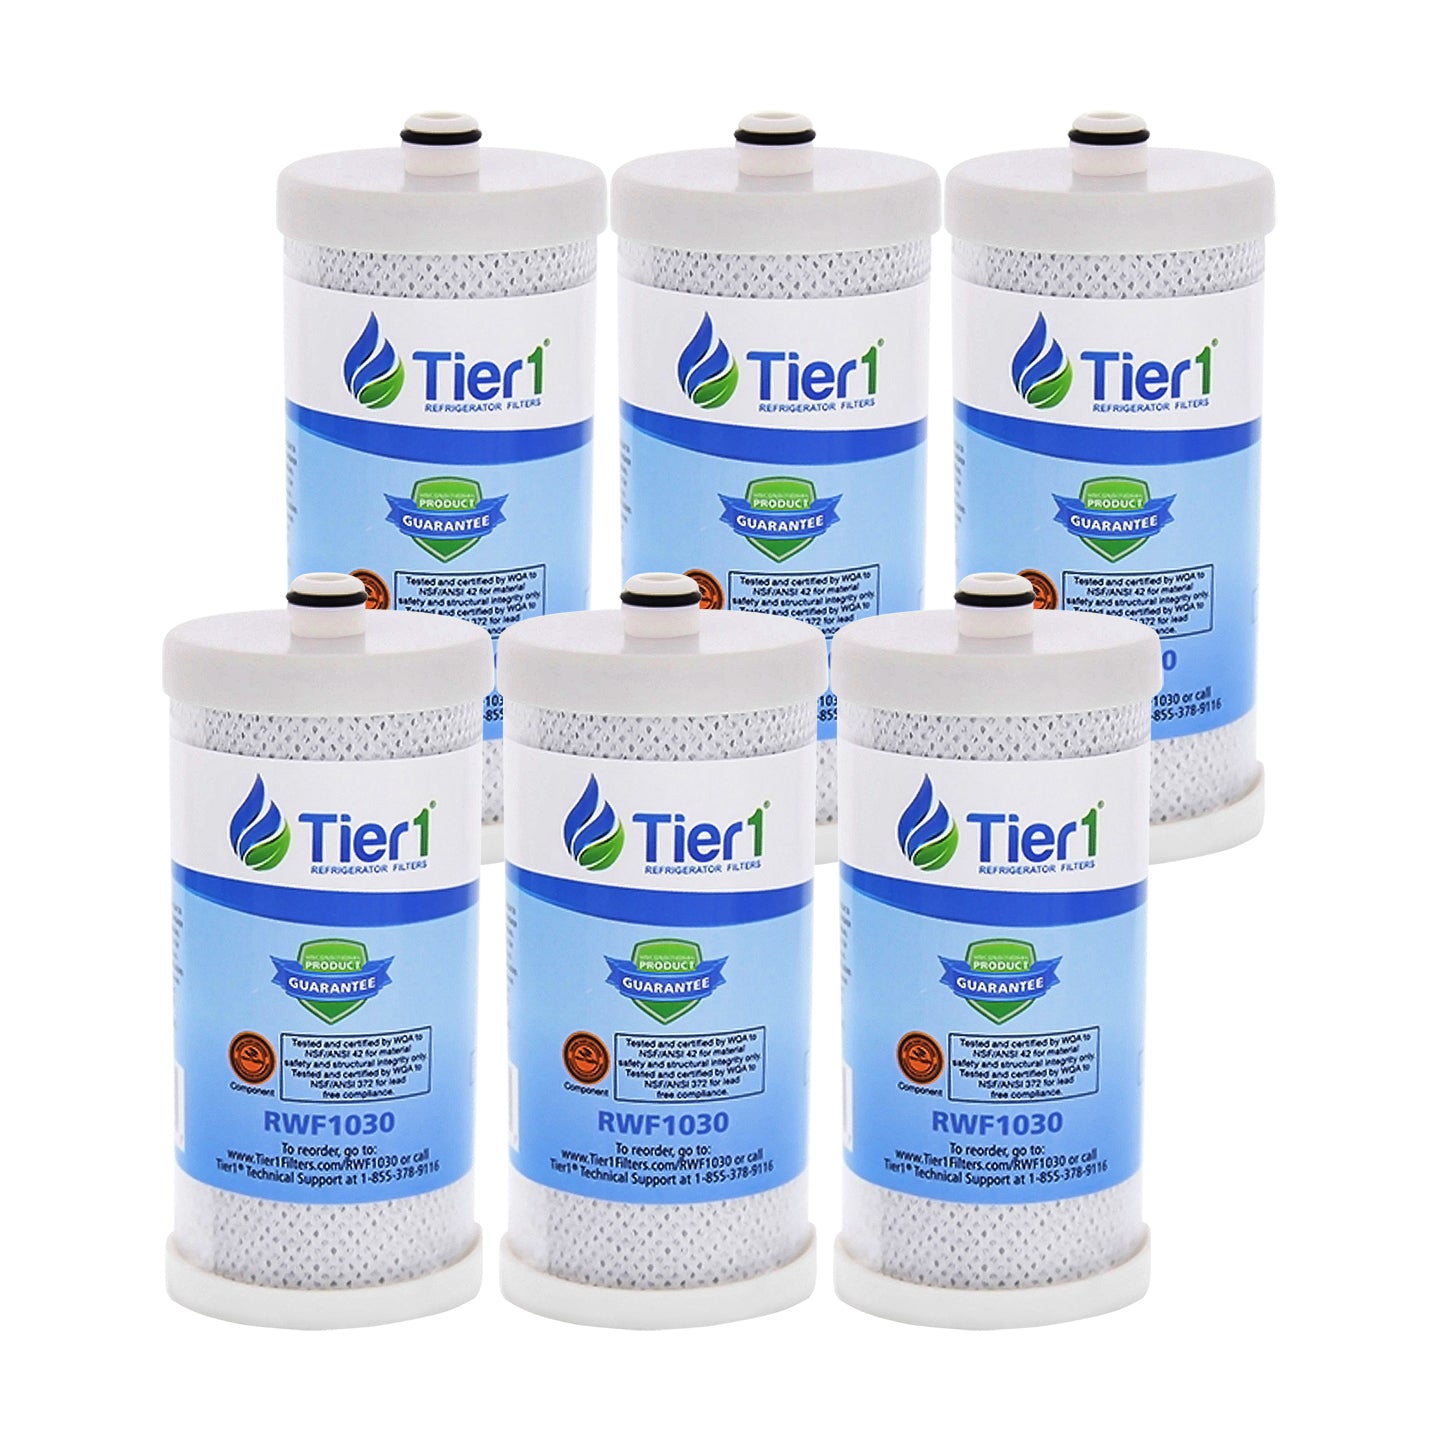 Tier1 Frigidaire WFCB/WF1CB Refrigerator Water Filter Replacement Comparable